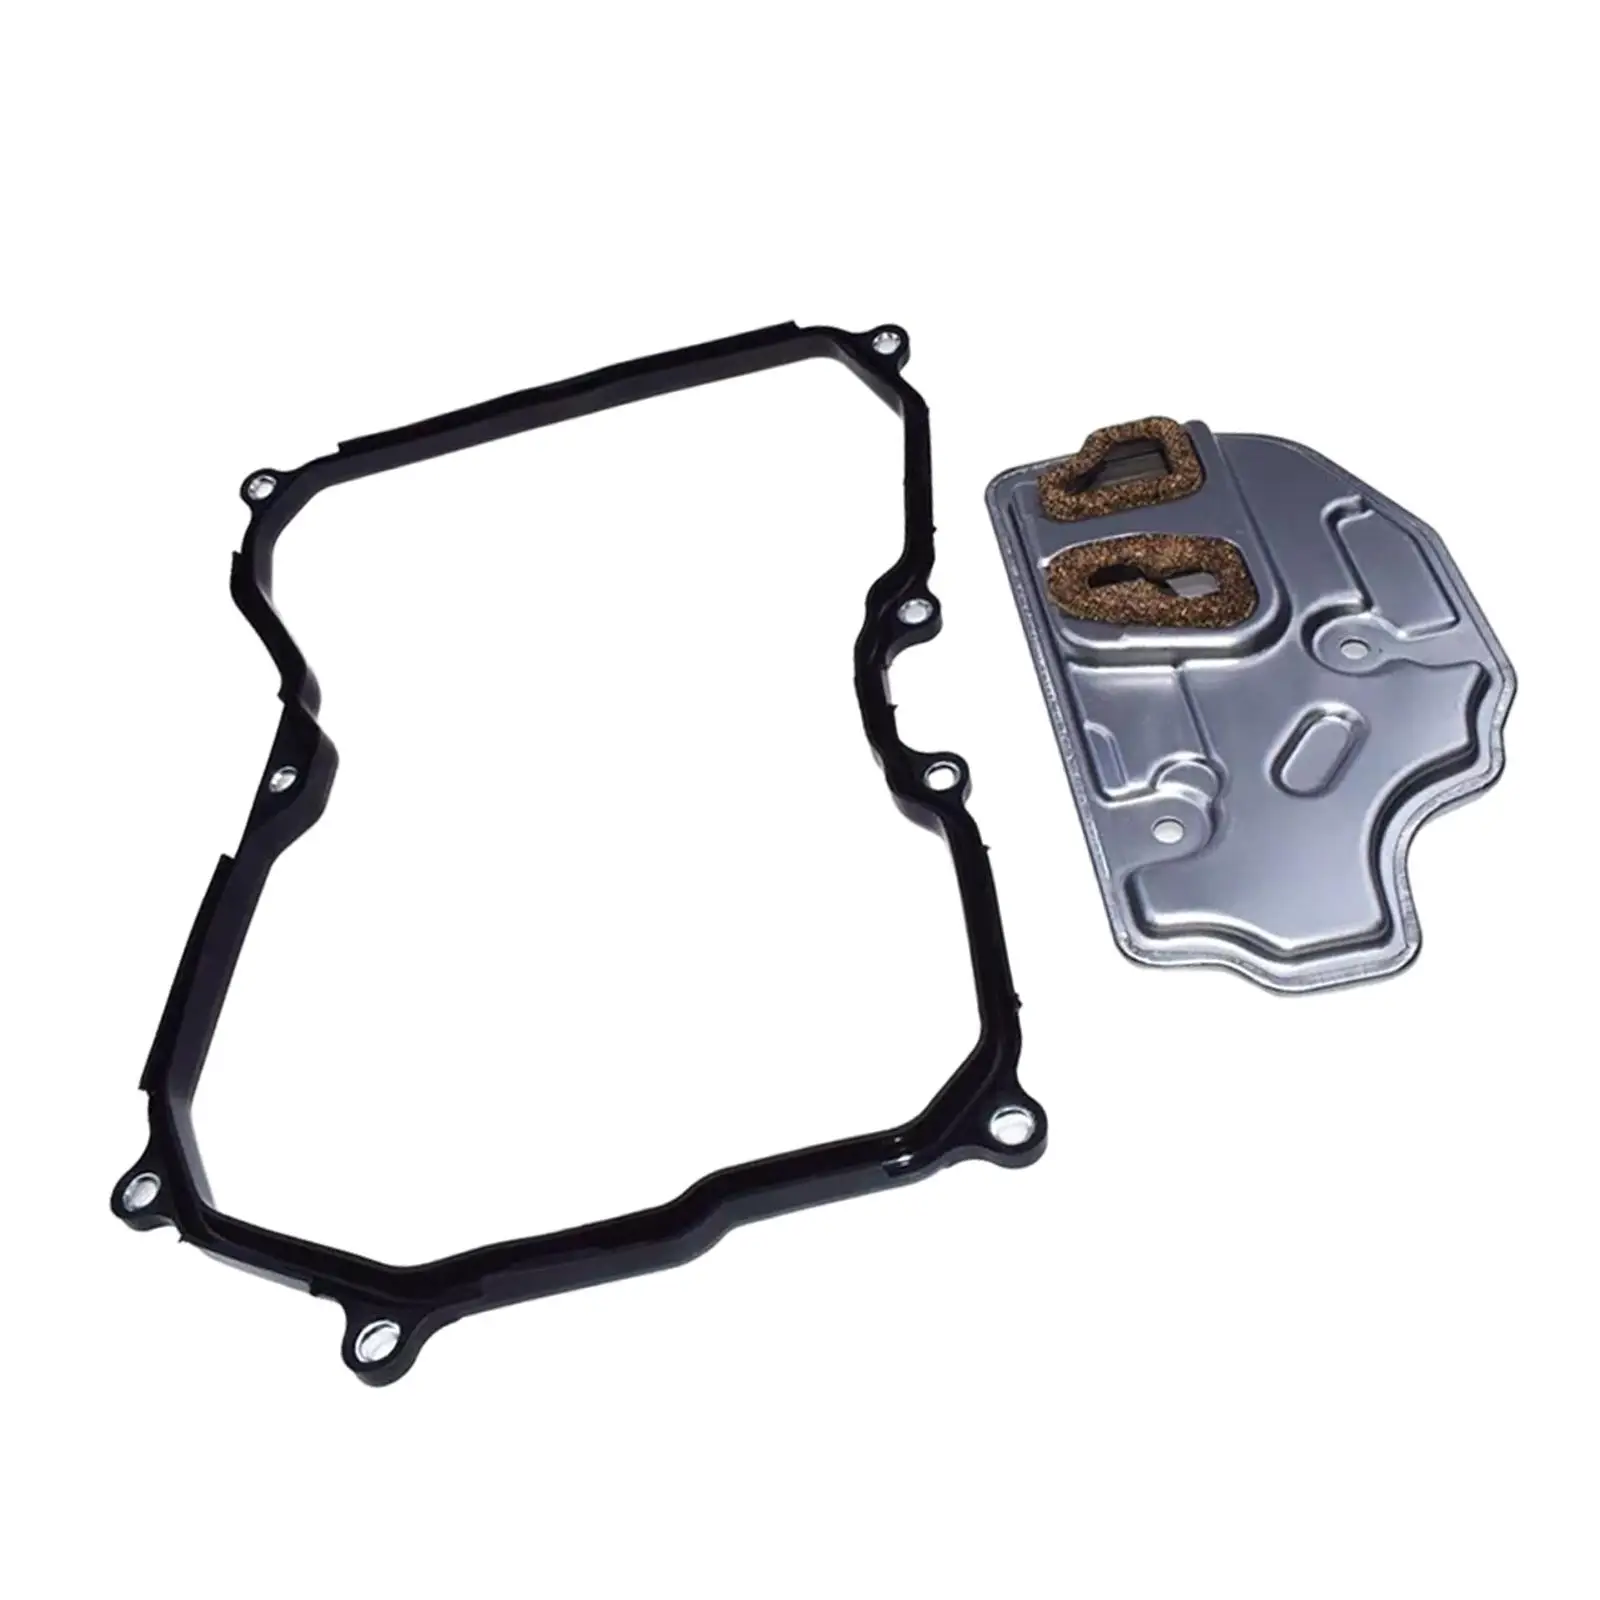 Automatic Transmission Oil Filter & Gasket kit suitable for  B6 cc 